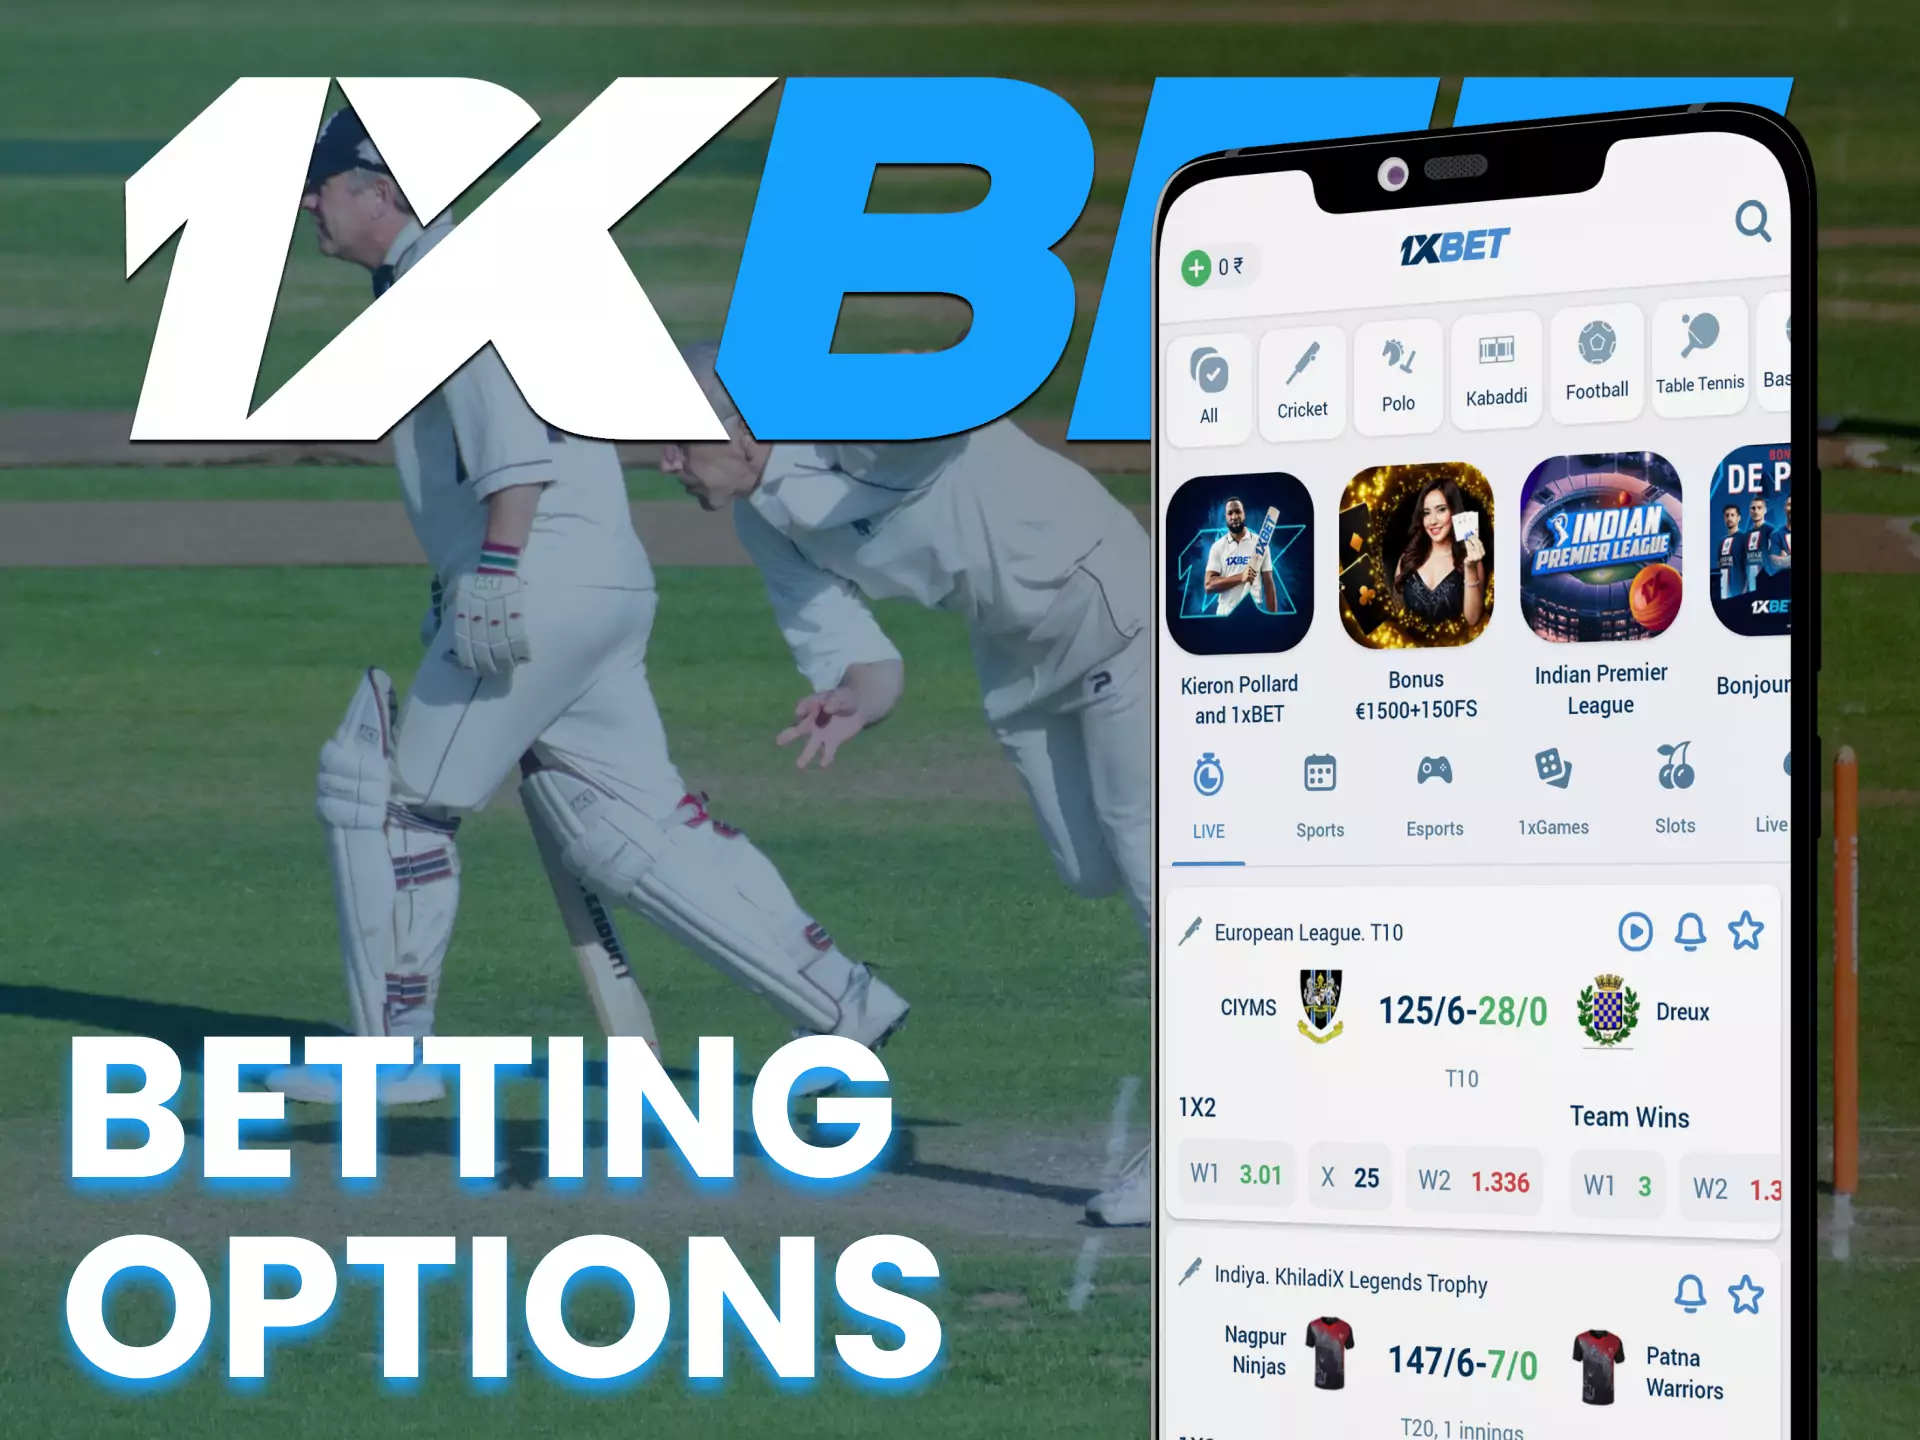 Try different options for sports betting at 1xBet.